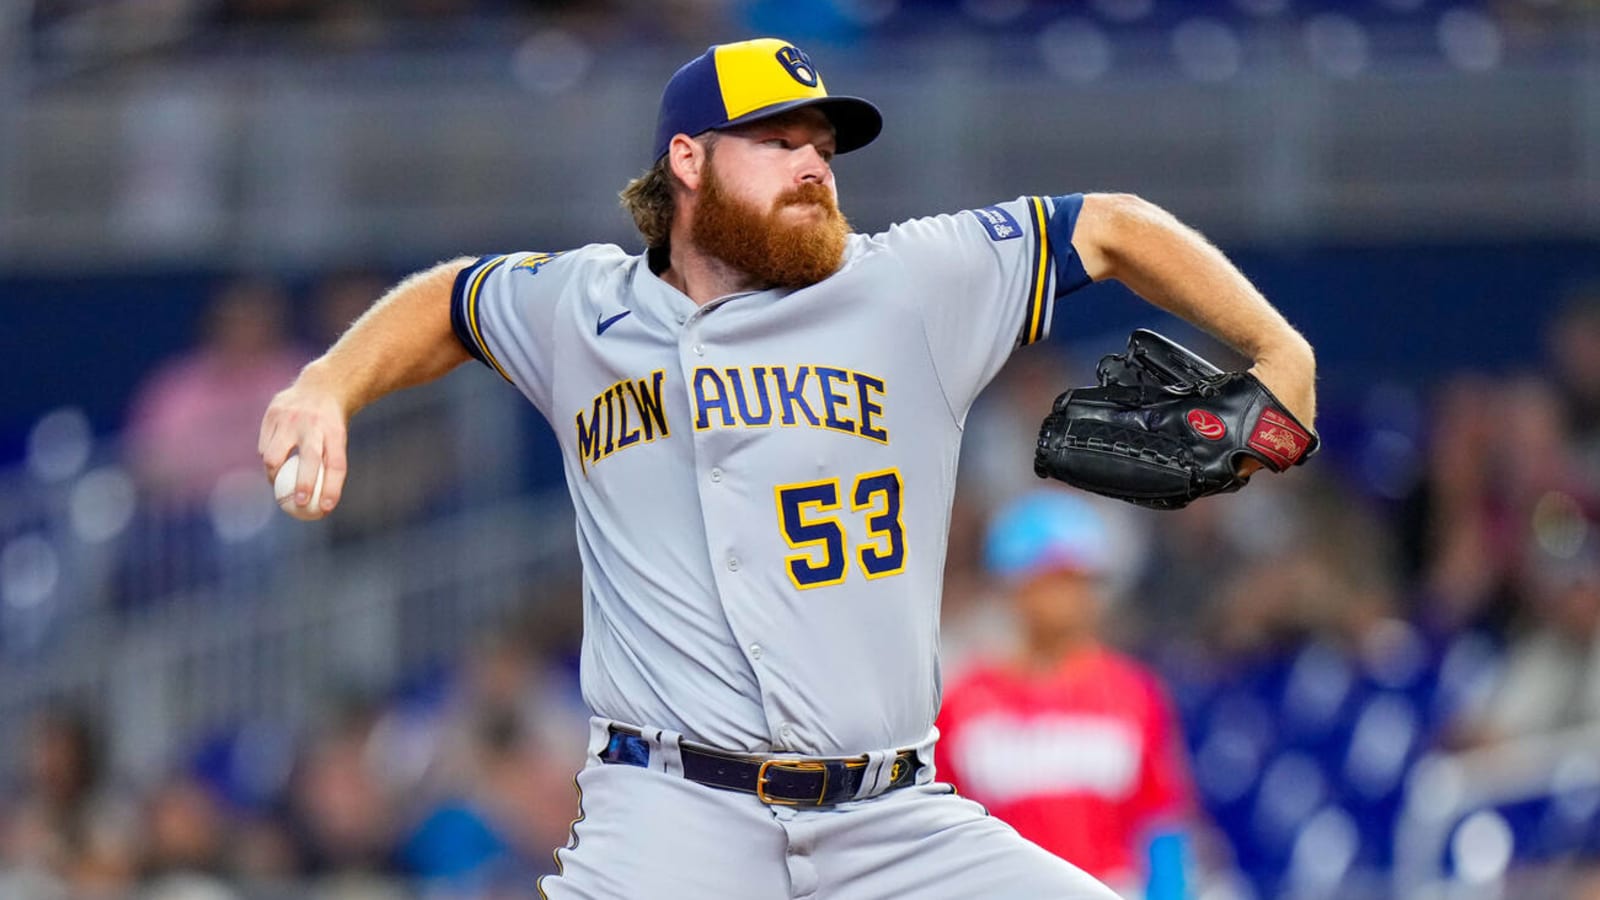 Brewers get bad injury news on star pitcher